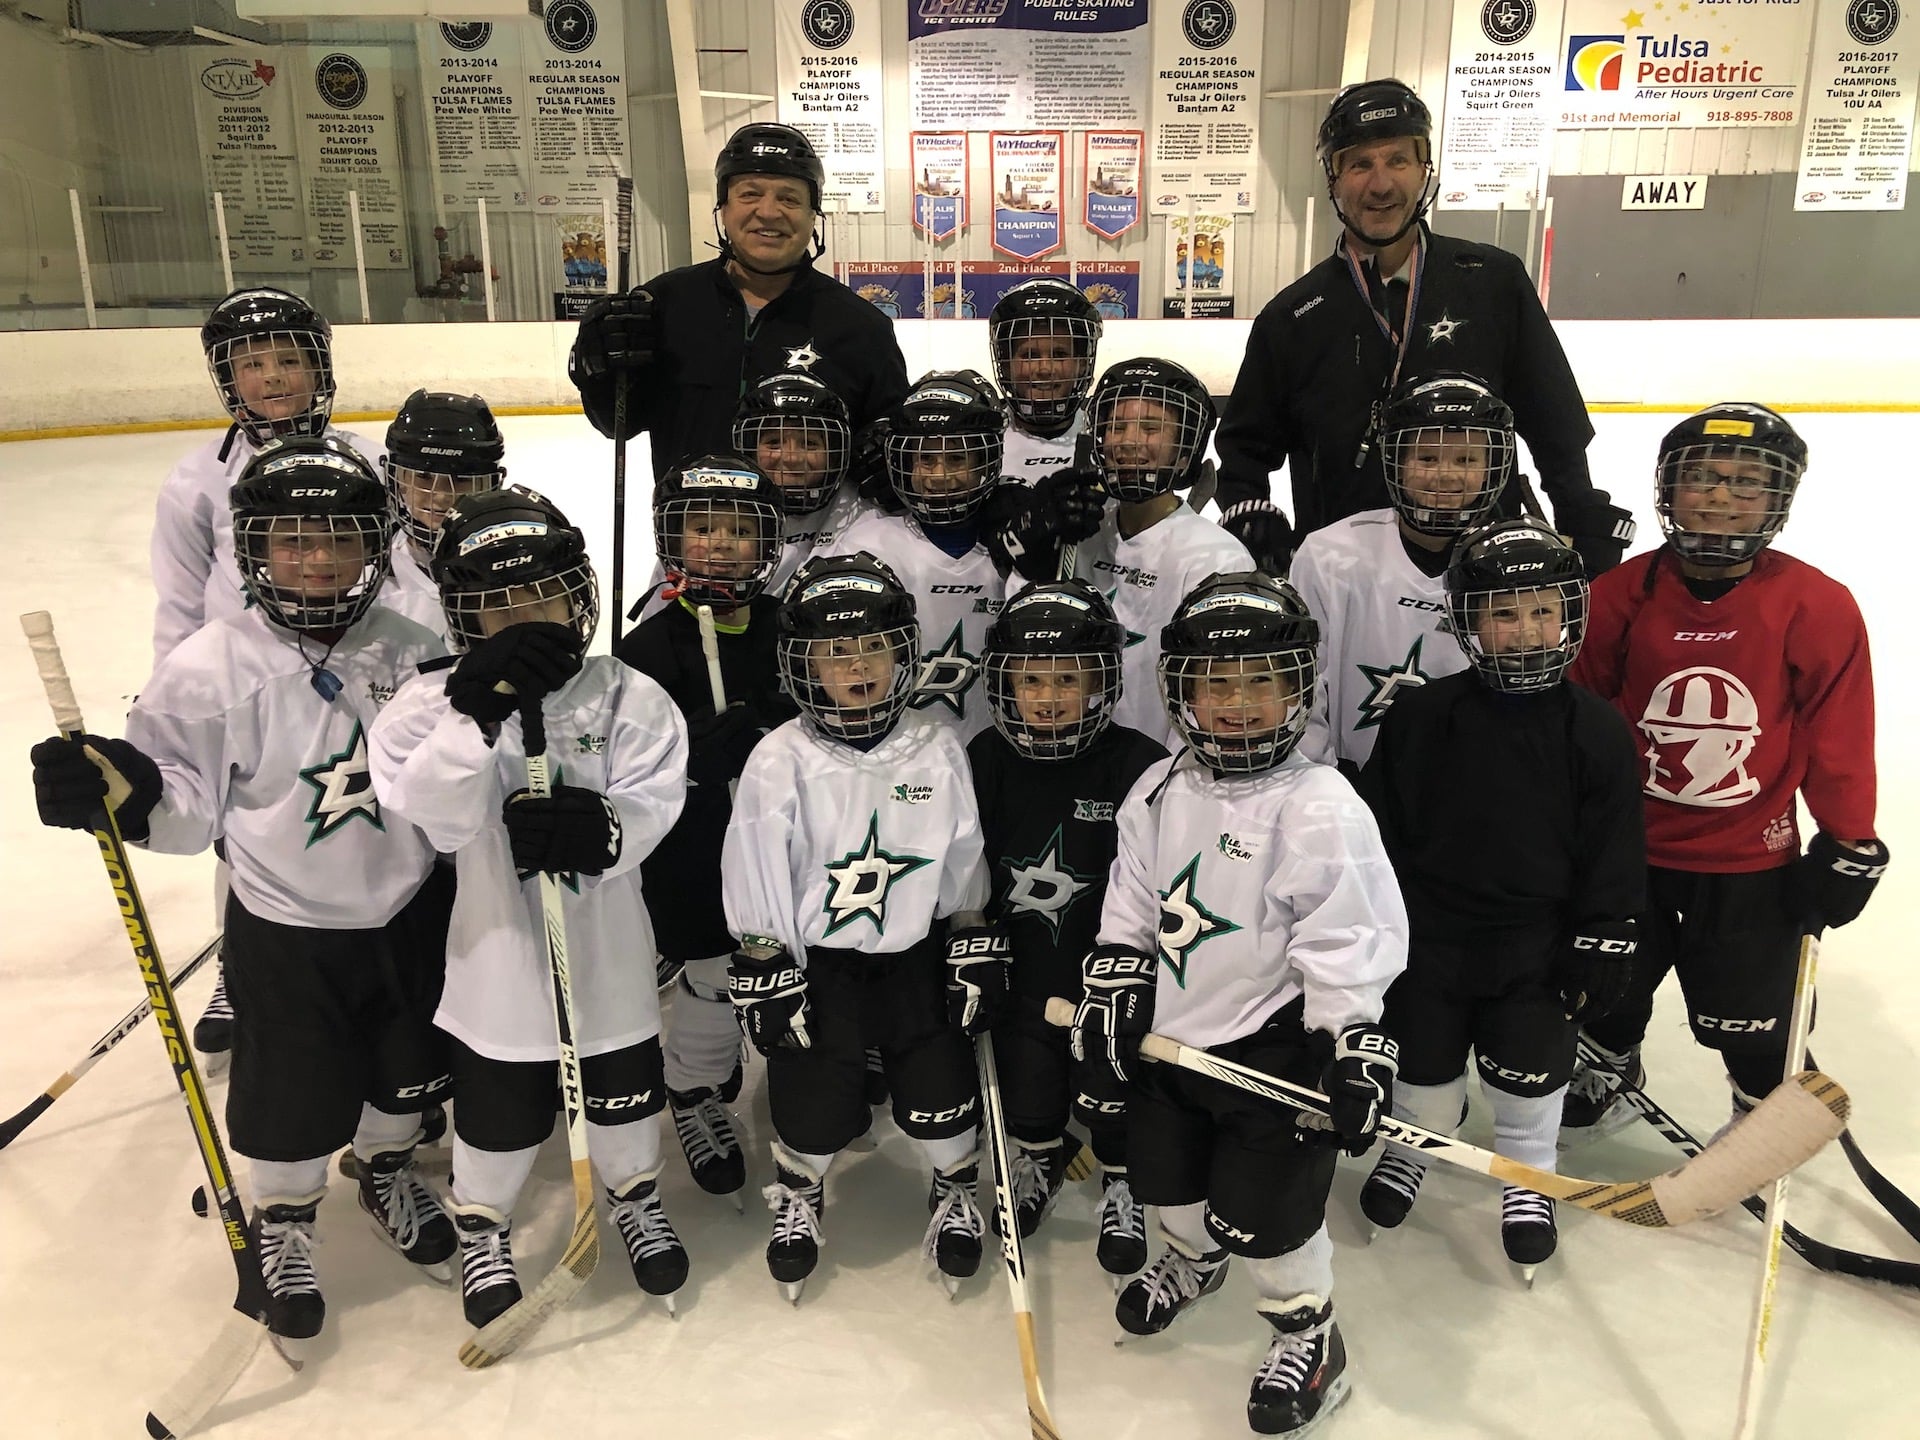 StarCenter - Registration is officially open for the 2022 Spring Dallas  Stars Metro Hockey League season! Players in divisions 6U through 18U can  play a fun season of hockey beginning in March!